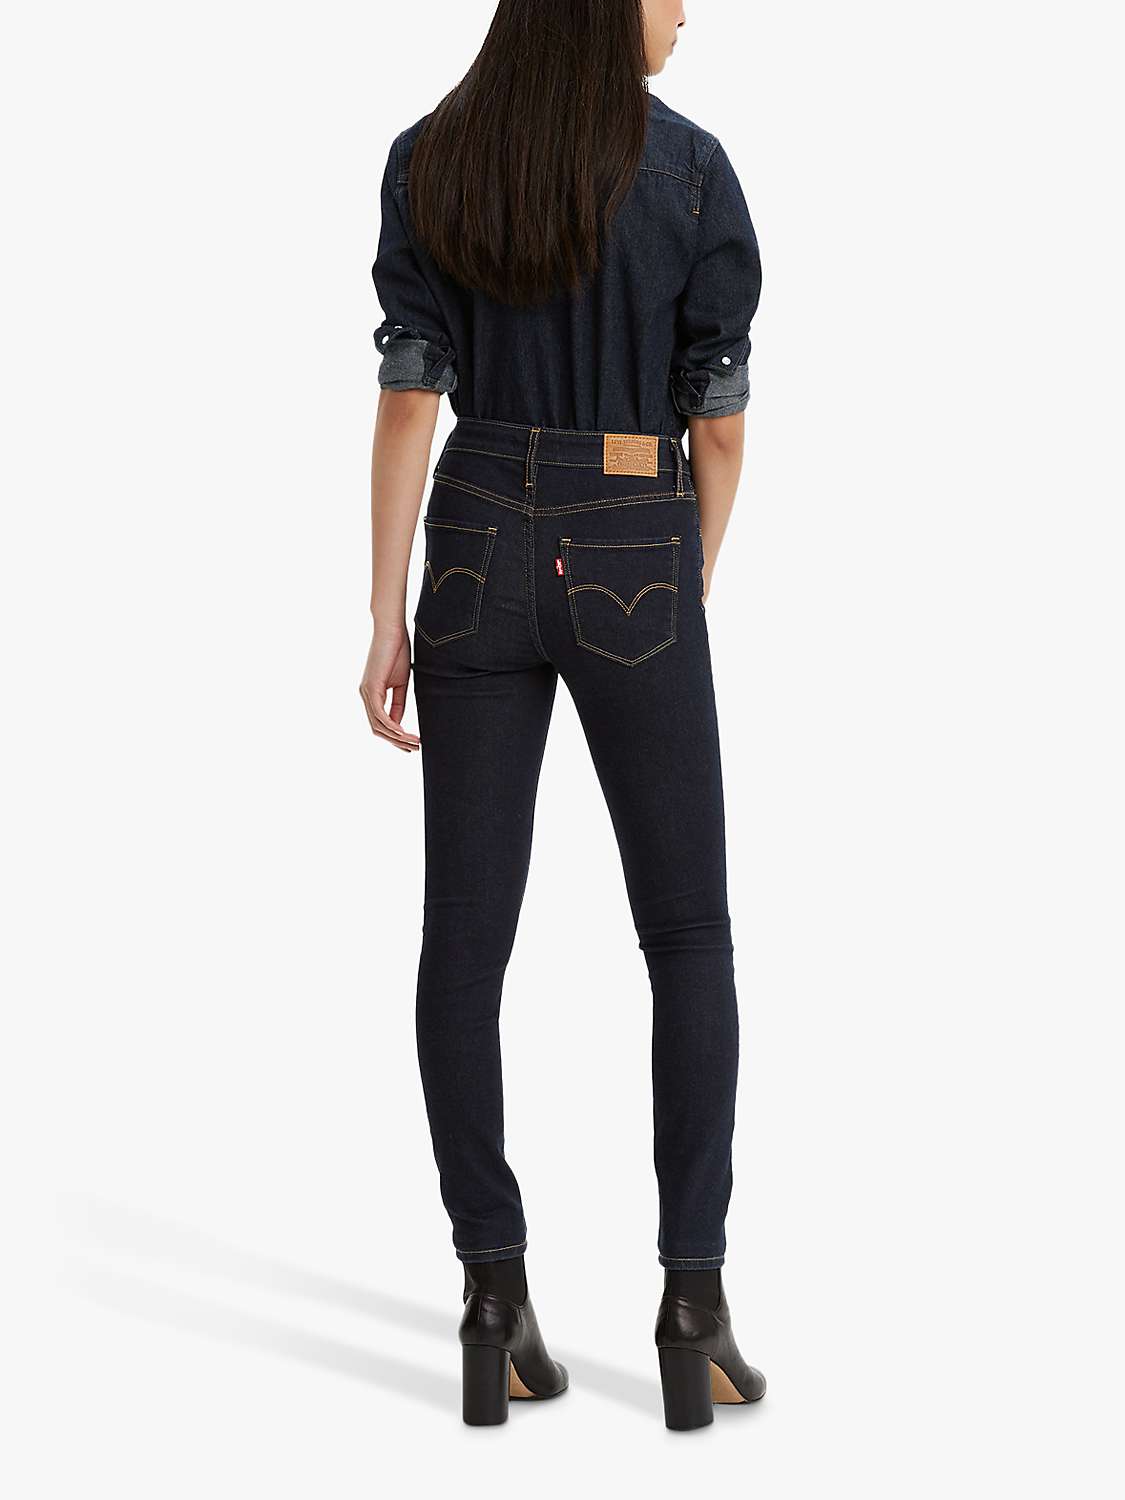 Buy Levi's 721 High Rise Skinny Jeans, To The Nine Online at johnlewis.com